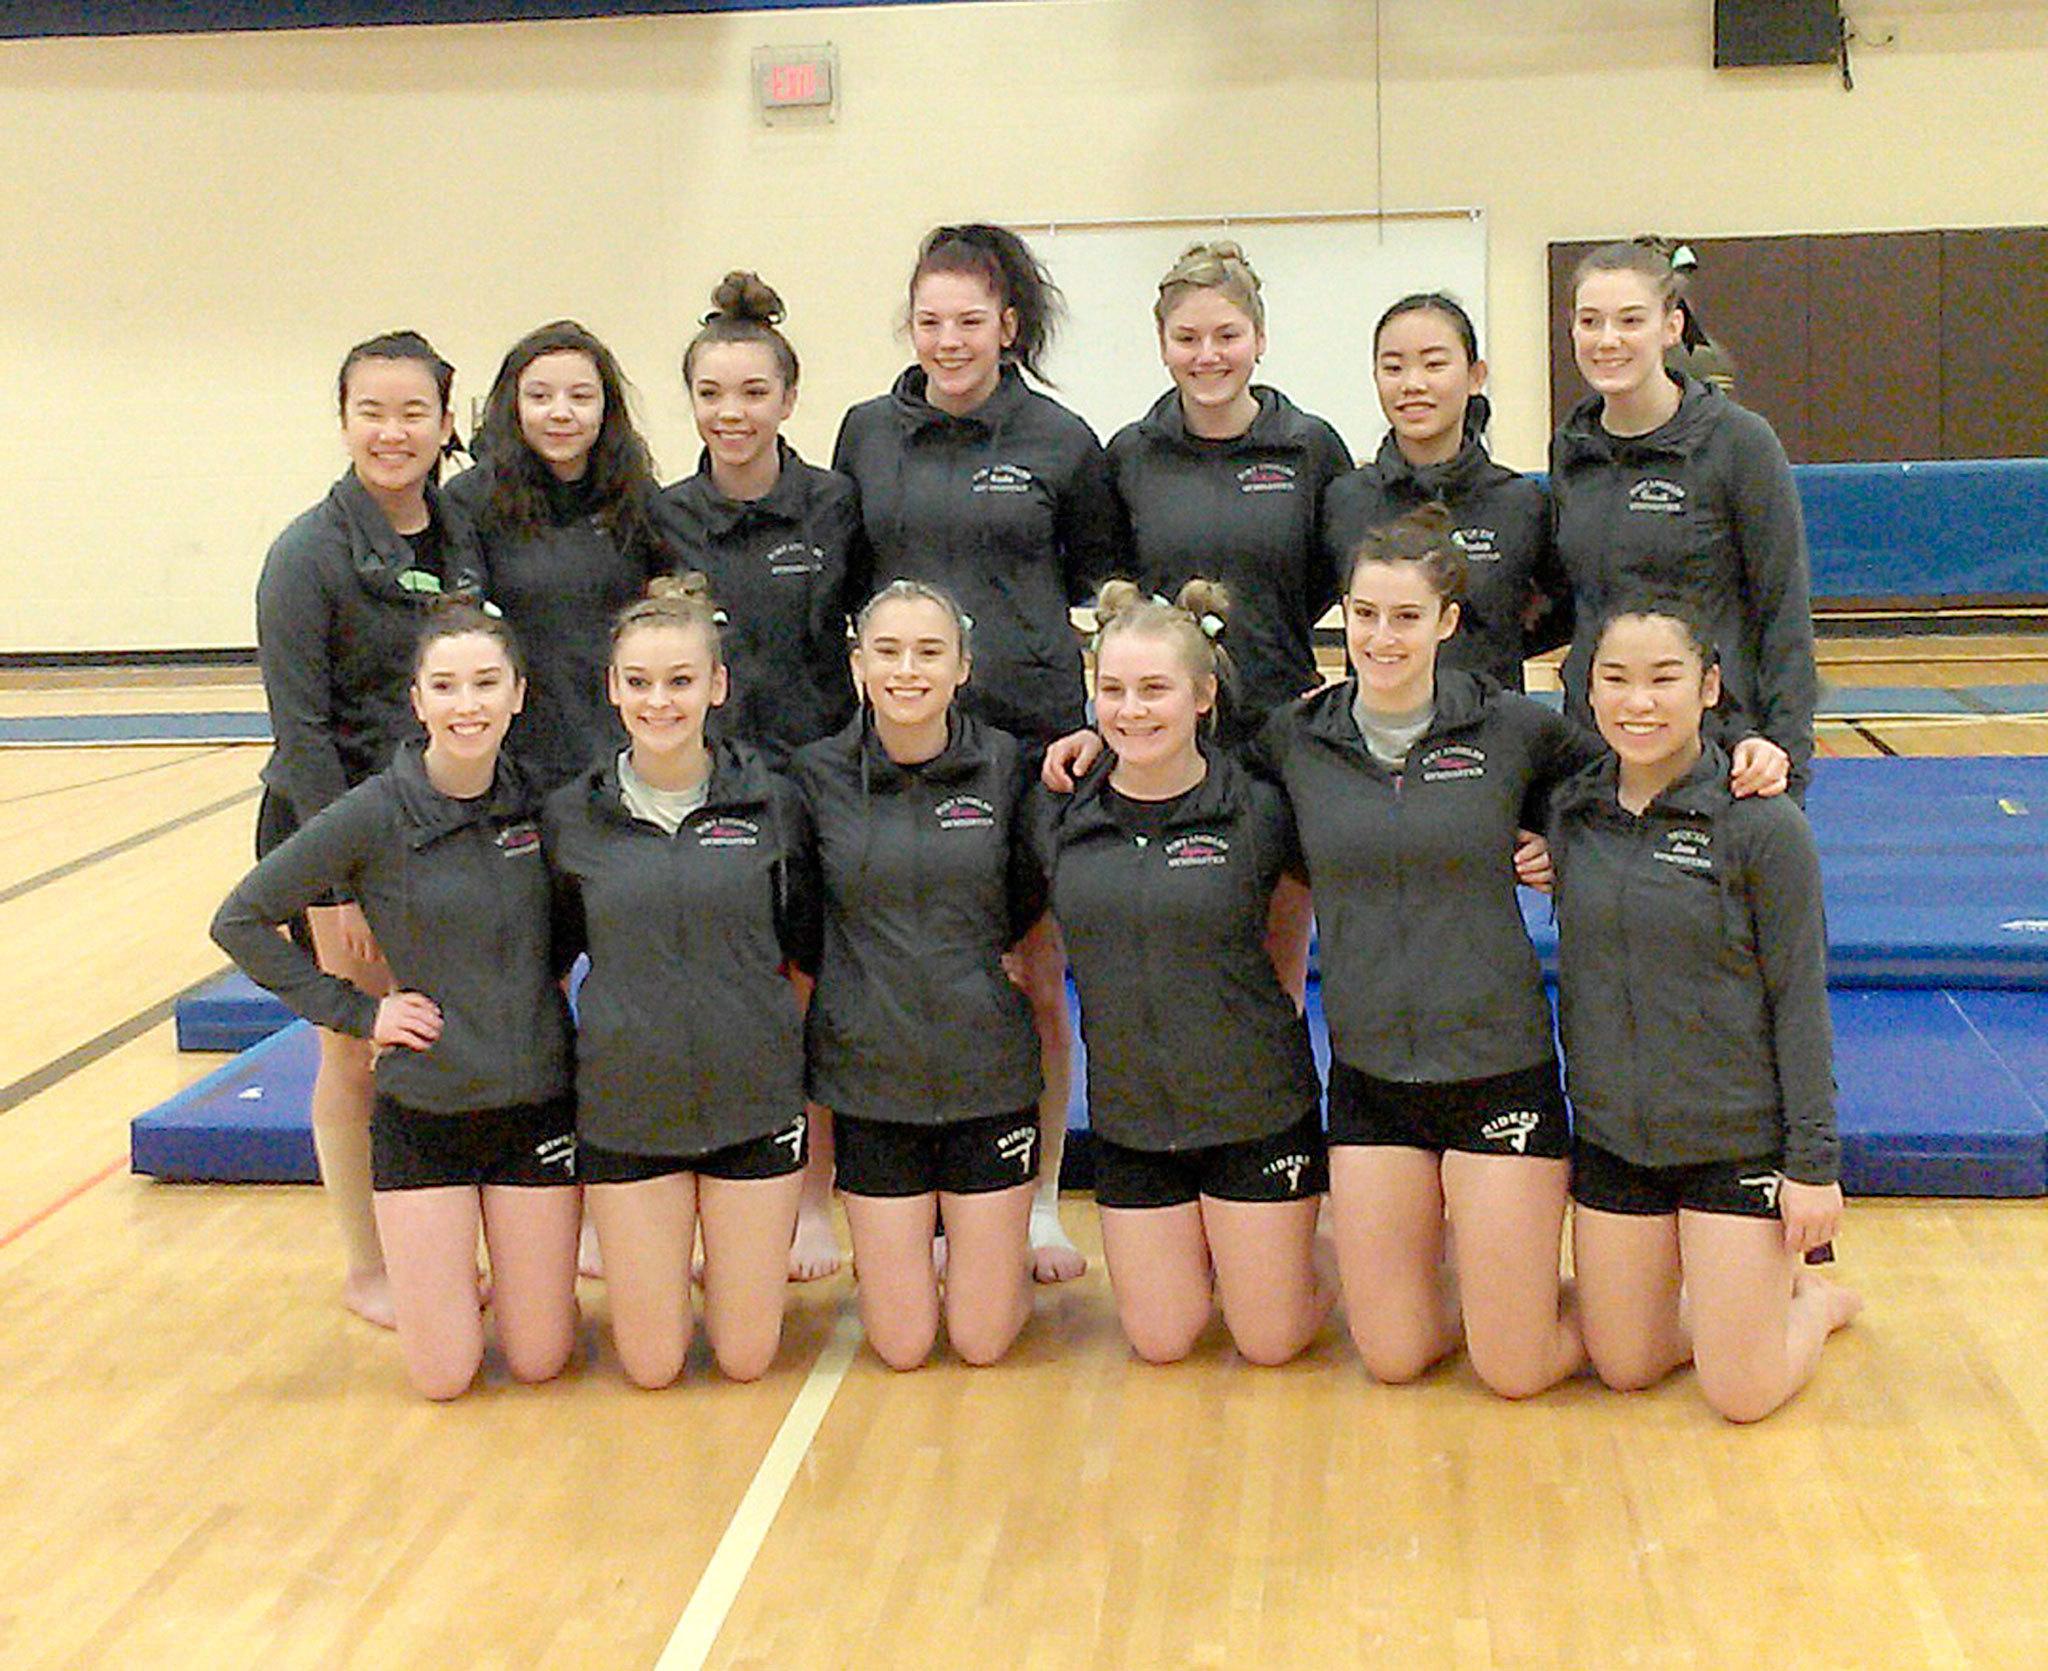 The Port Angeles gymnastics team won the 2A/3A West Central District Championship on Saturday. Team members are back row, from left, Lum Fu, Kenzee Richardson, Halle Coventon, Aiesha LaTourette, Nikaila Price, Elizabeth Sweet of Sequim and Cassandra Middlestead. From left, back row, are Cassidy Tamburro, Laura Rooney, Karlie Gochnour, Sydney Miner, Maya Wharton and Lesae Pfeffer of Sequim.